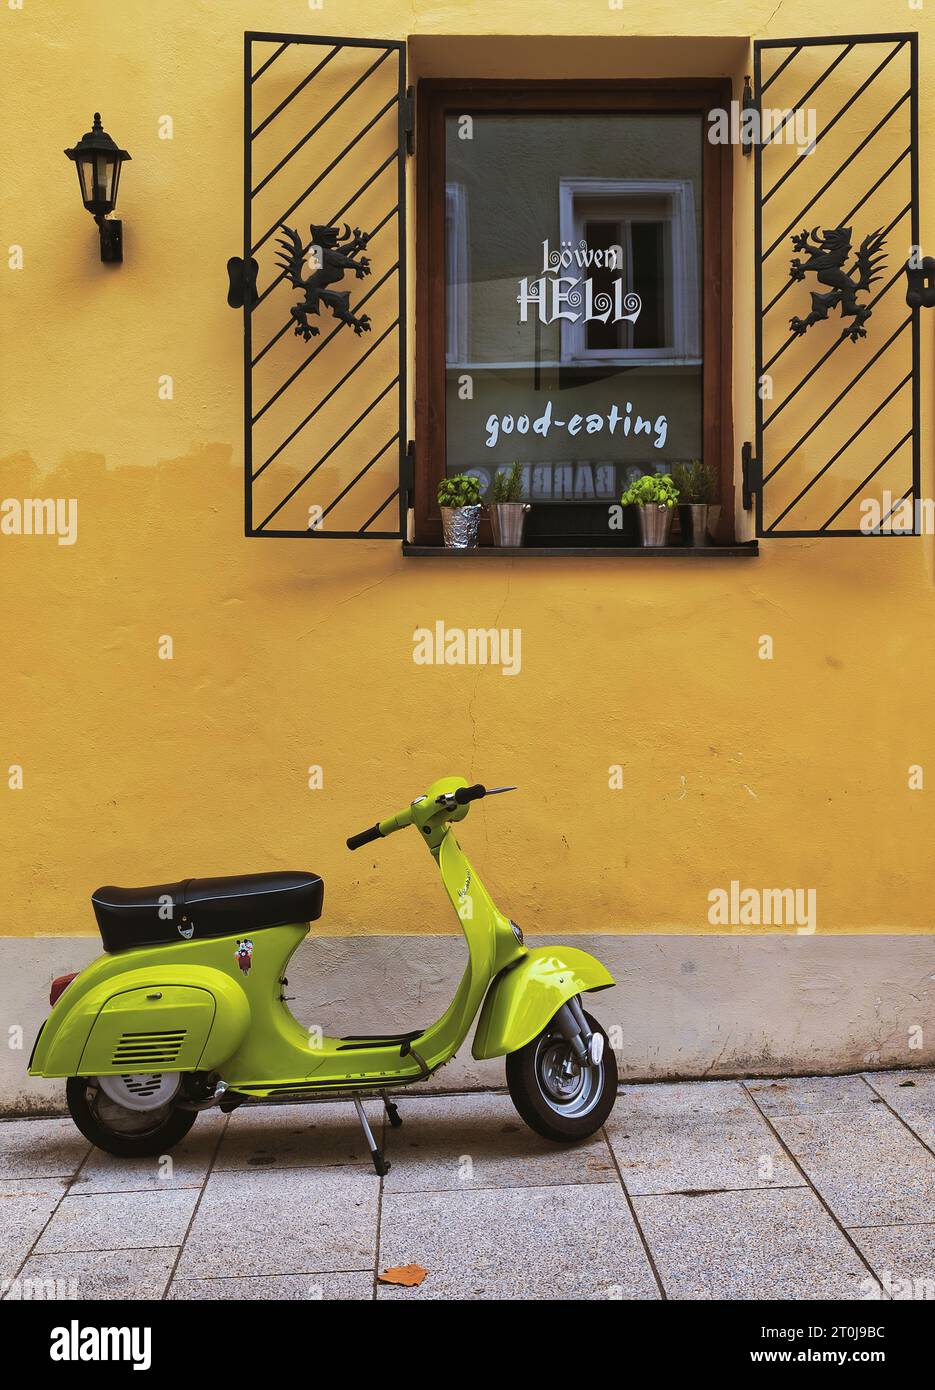 A little flavour of European cool with a vibrantly coloured scooter contrasting with the brightly painted cafe wall behind it. Stock Photo